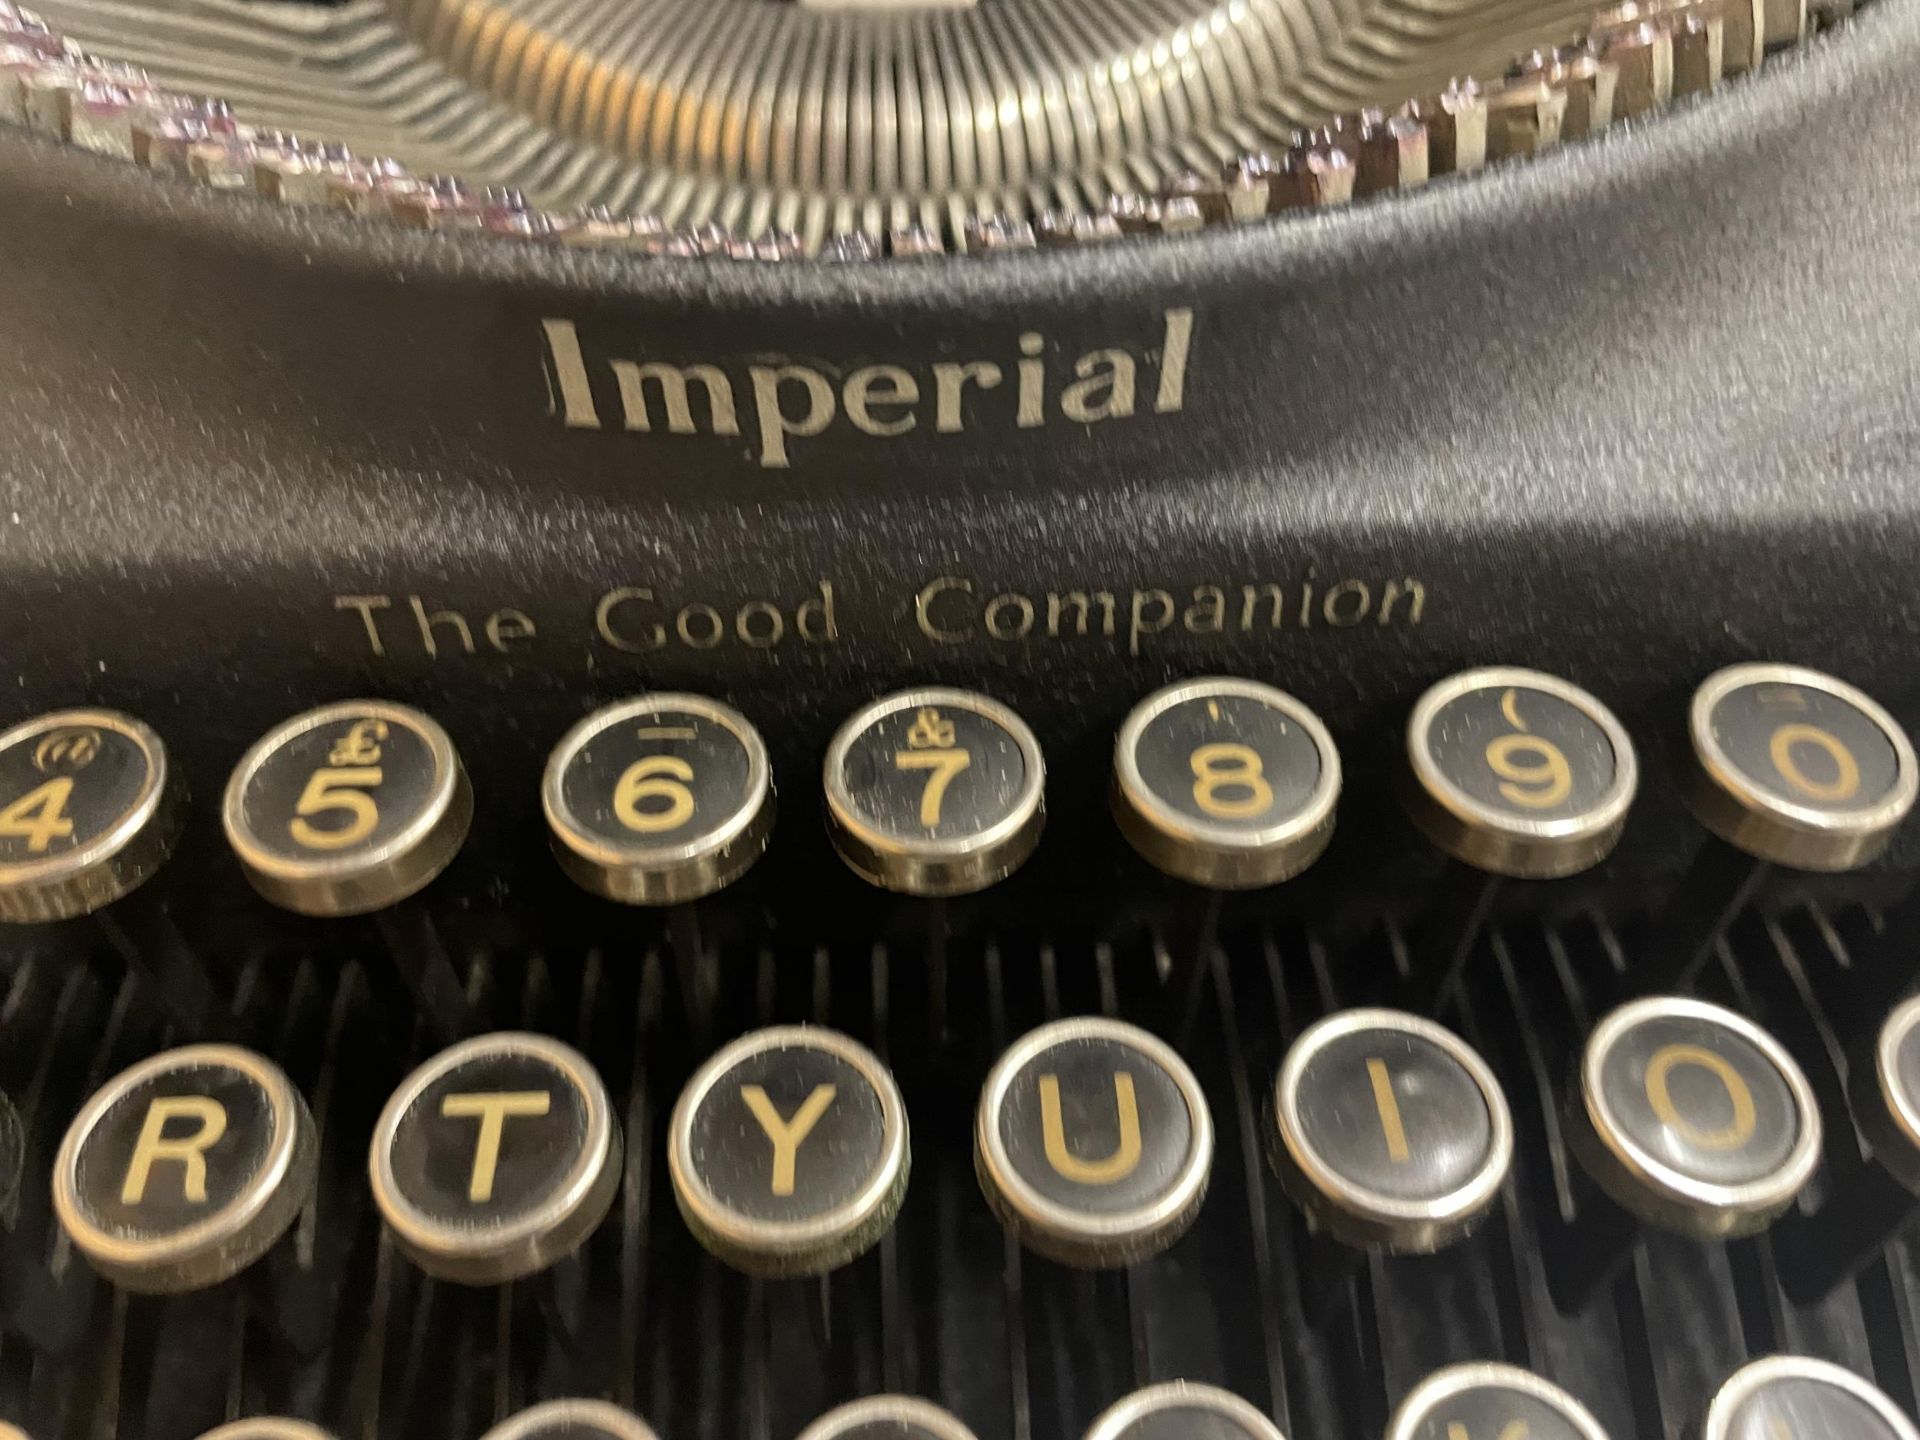 A VINTAGE CASED IMPERIAL THE GRAND COMPANION TYPEWRITER - Image 3 of 5